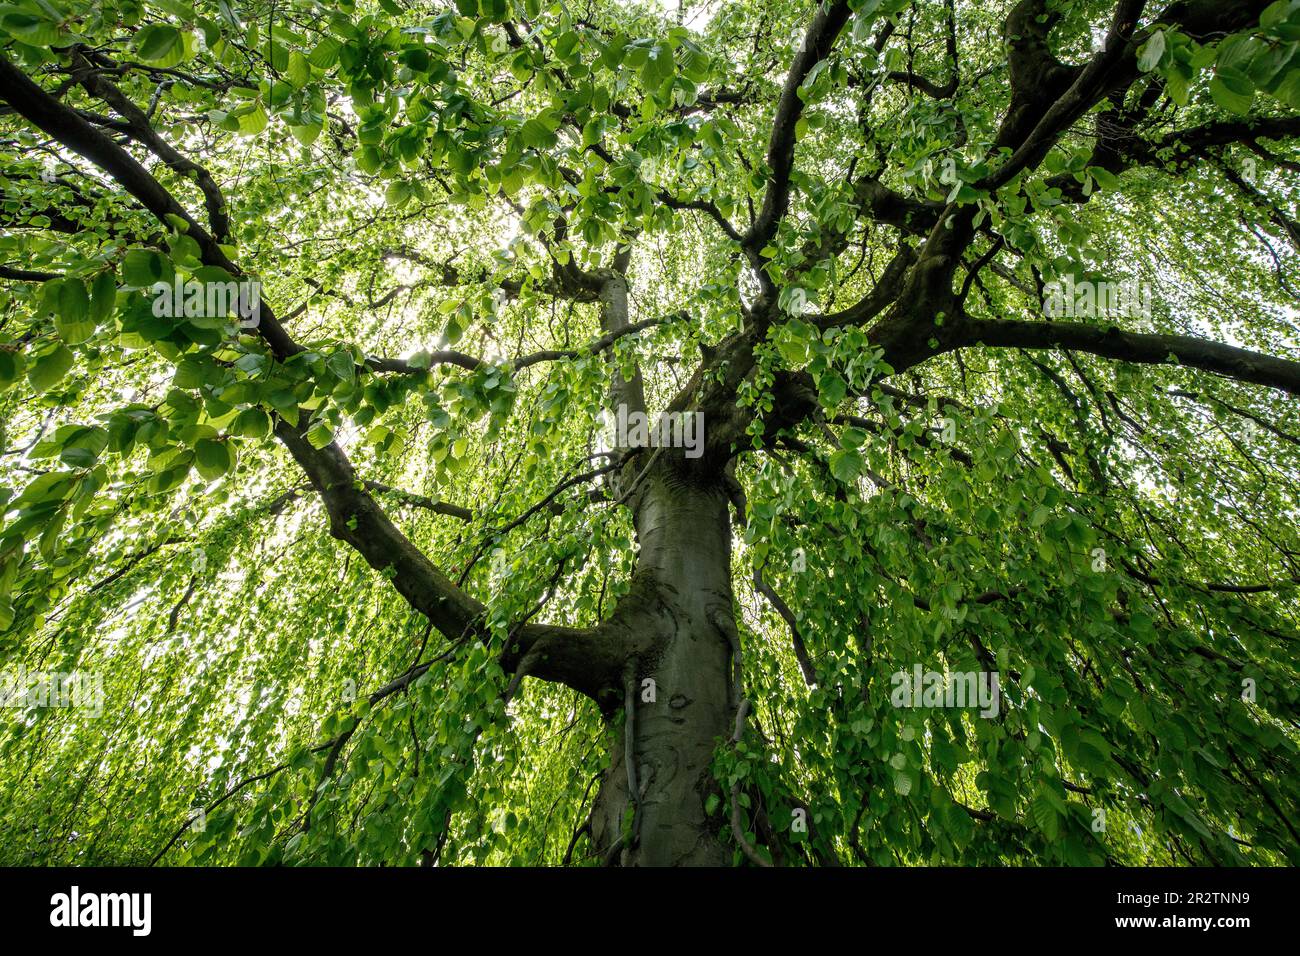 weeping beech (Fagus sylvatica f. pendula) in the Rhine Park in the district Deutz, local recreation area,  Cologne, Germany.   Haenge-Buche (Fagus sy Stock Photo